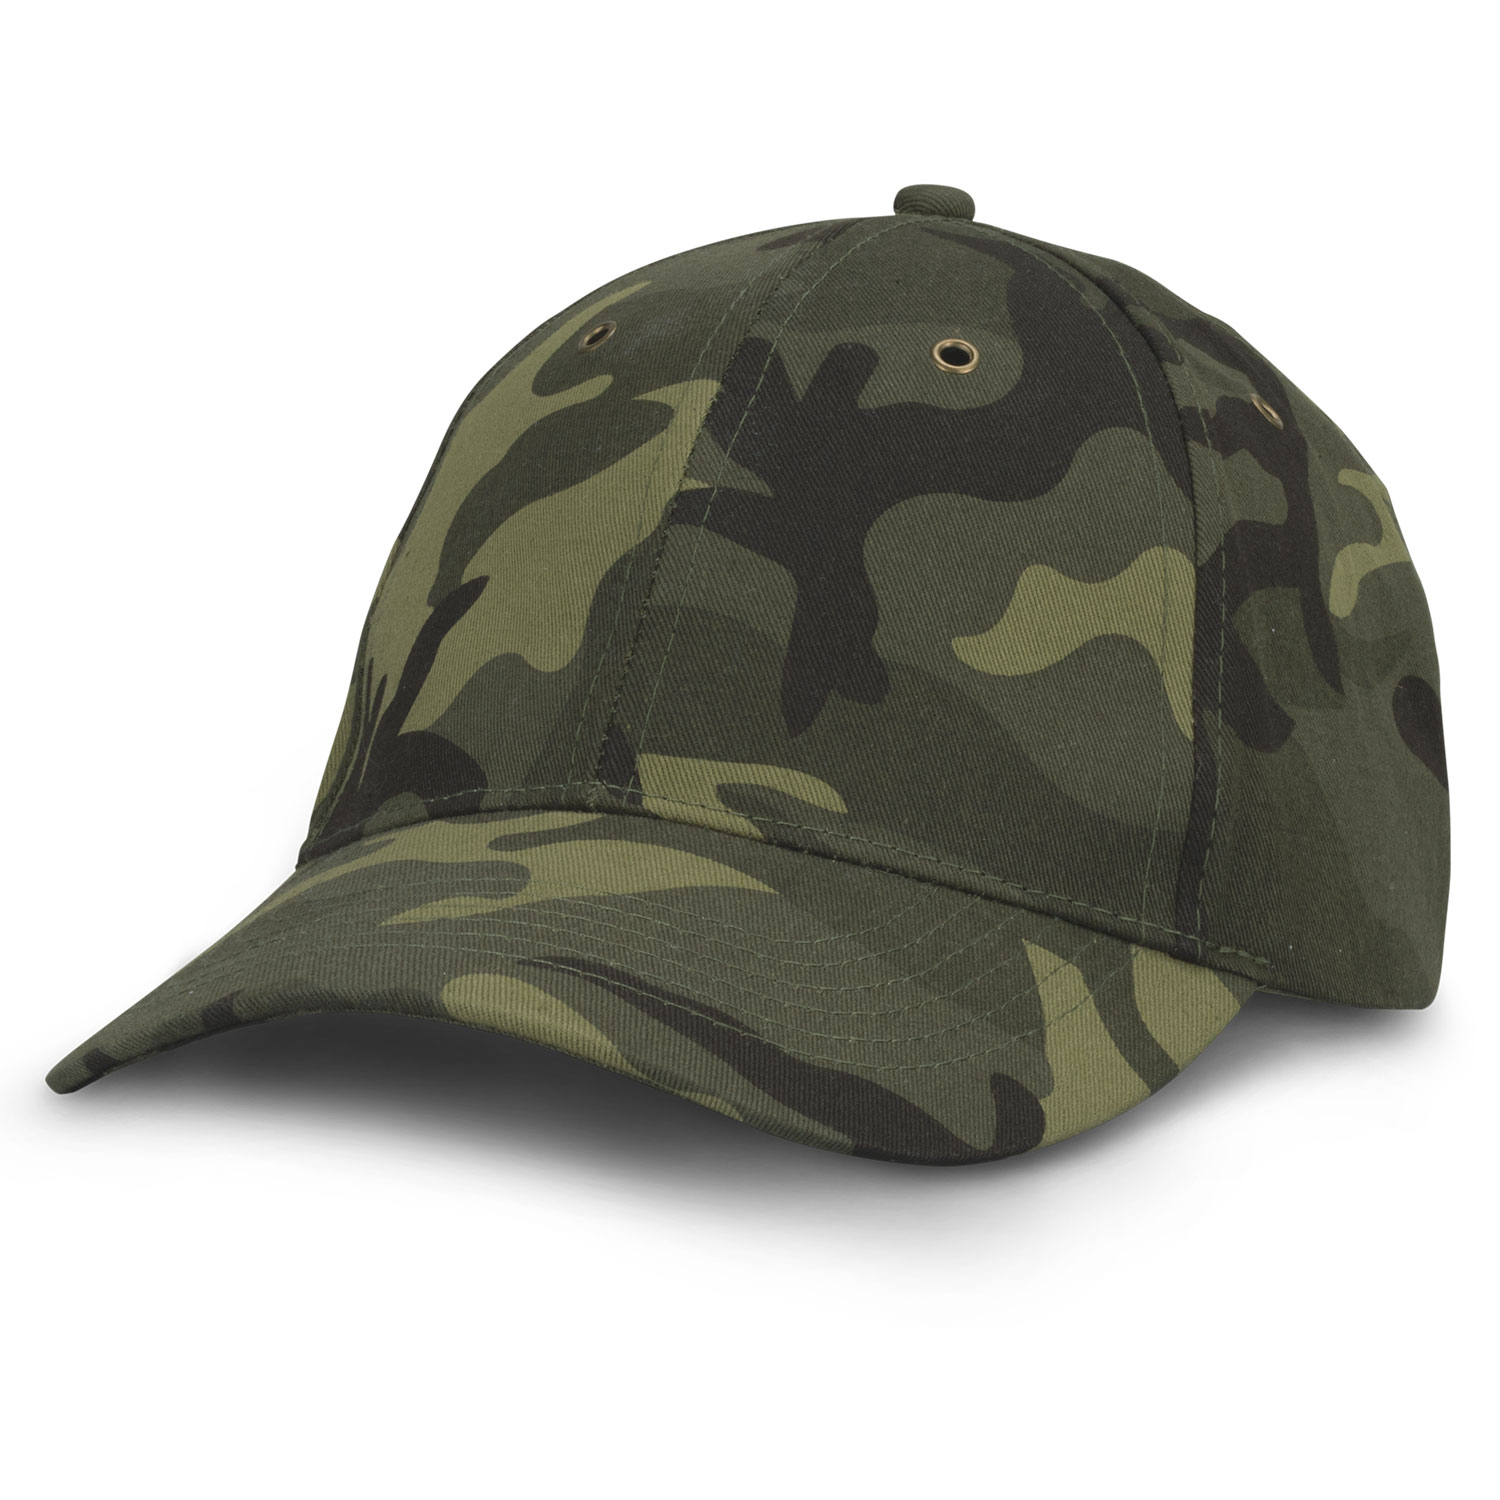 Agriculture Camouflage Cap Camouflage